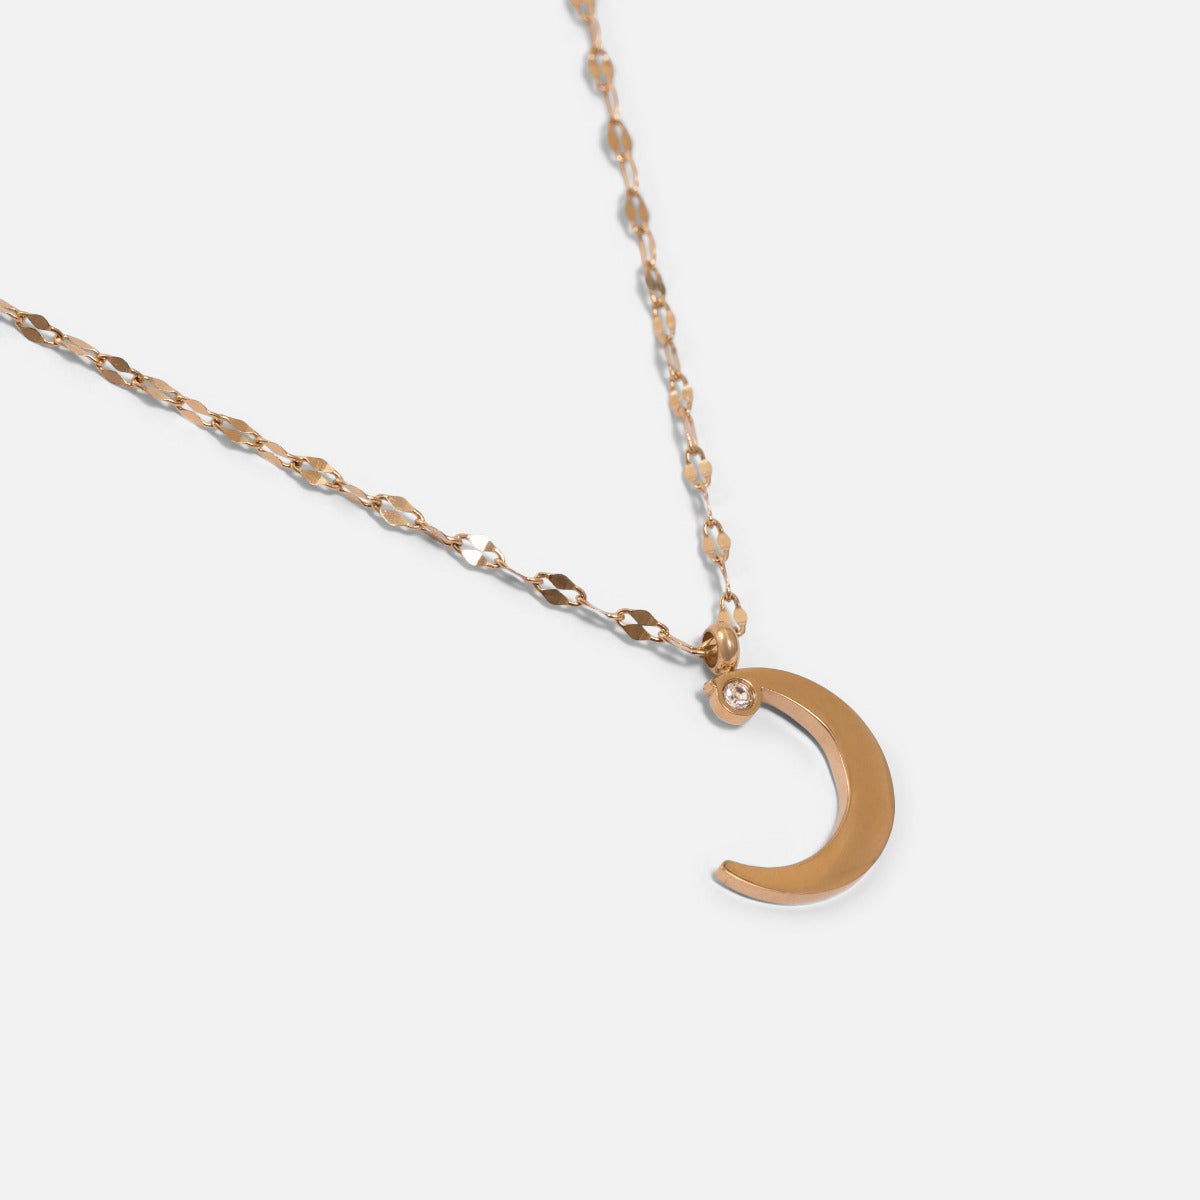 Golden necklace with shinny mesh and moon charm in stainless steel